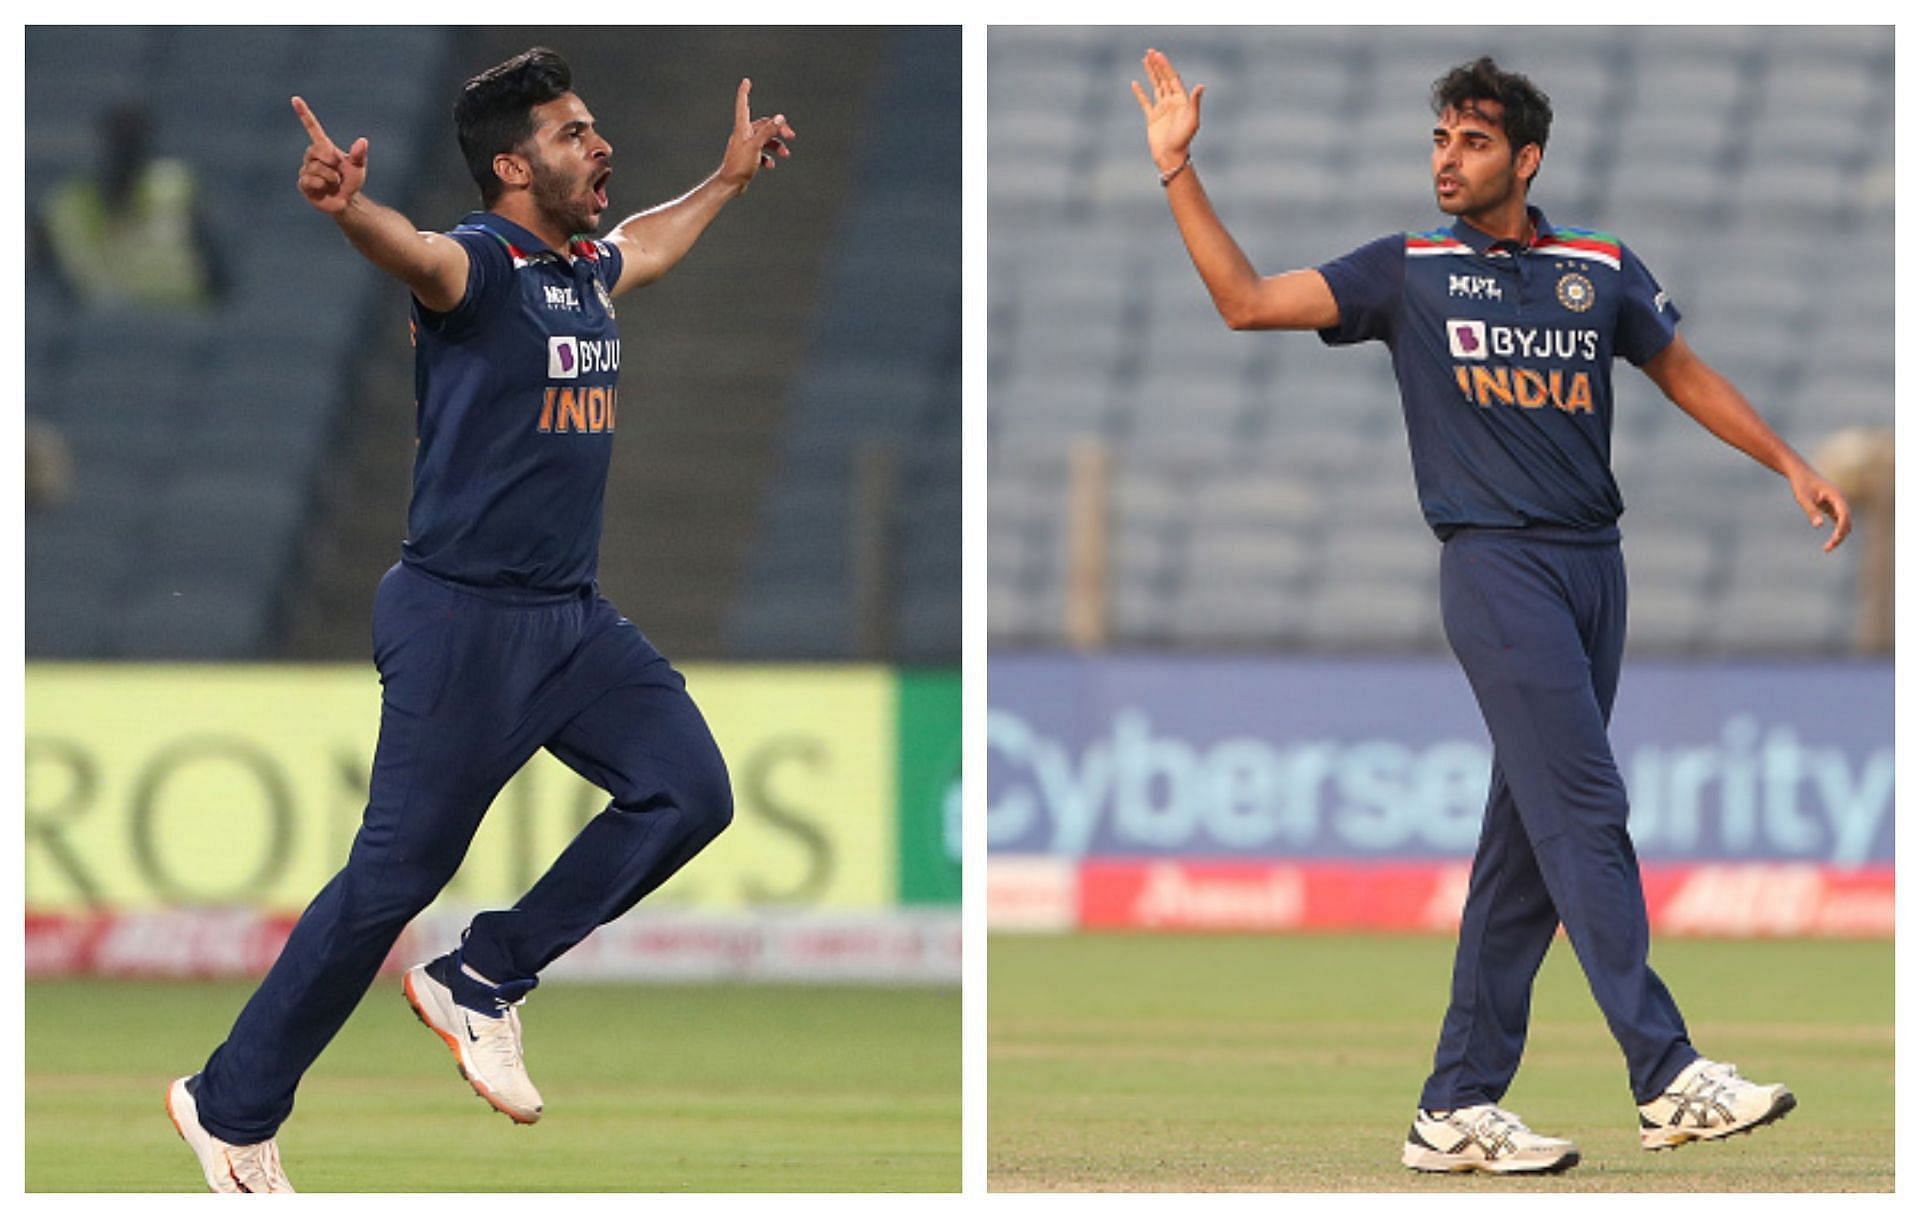 Shardul Thakur and Bhuvaneshwar Kumar were among the wickets for India in ODIs